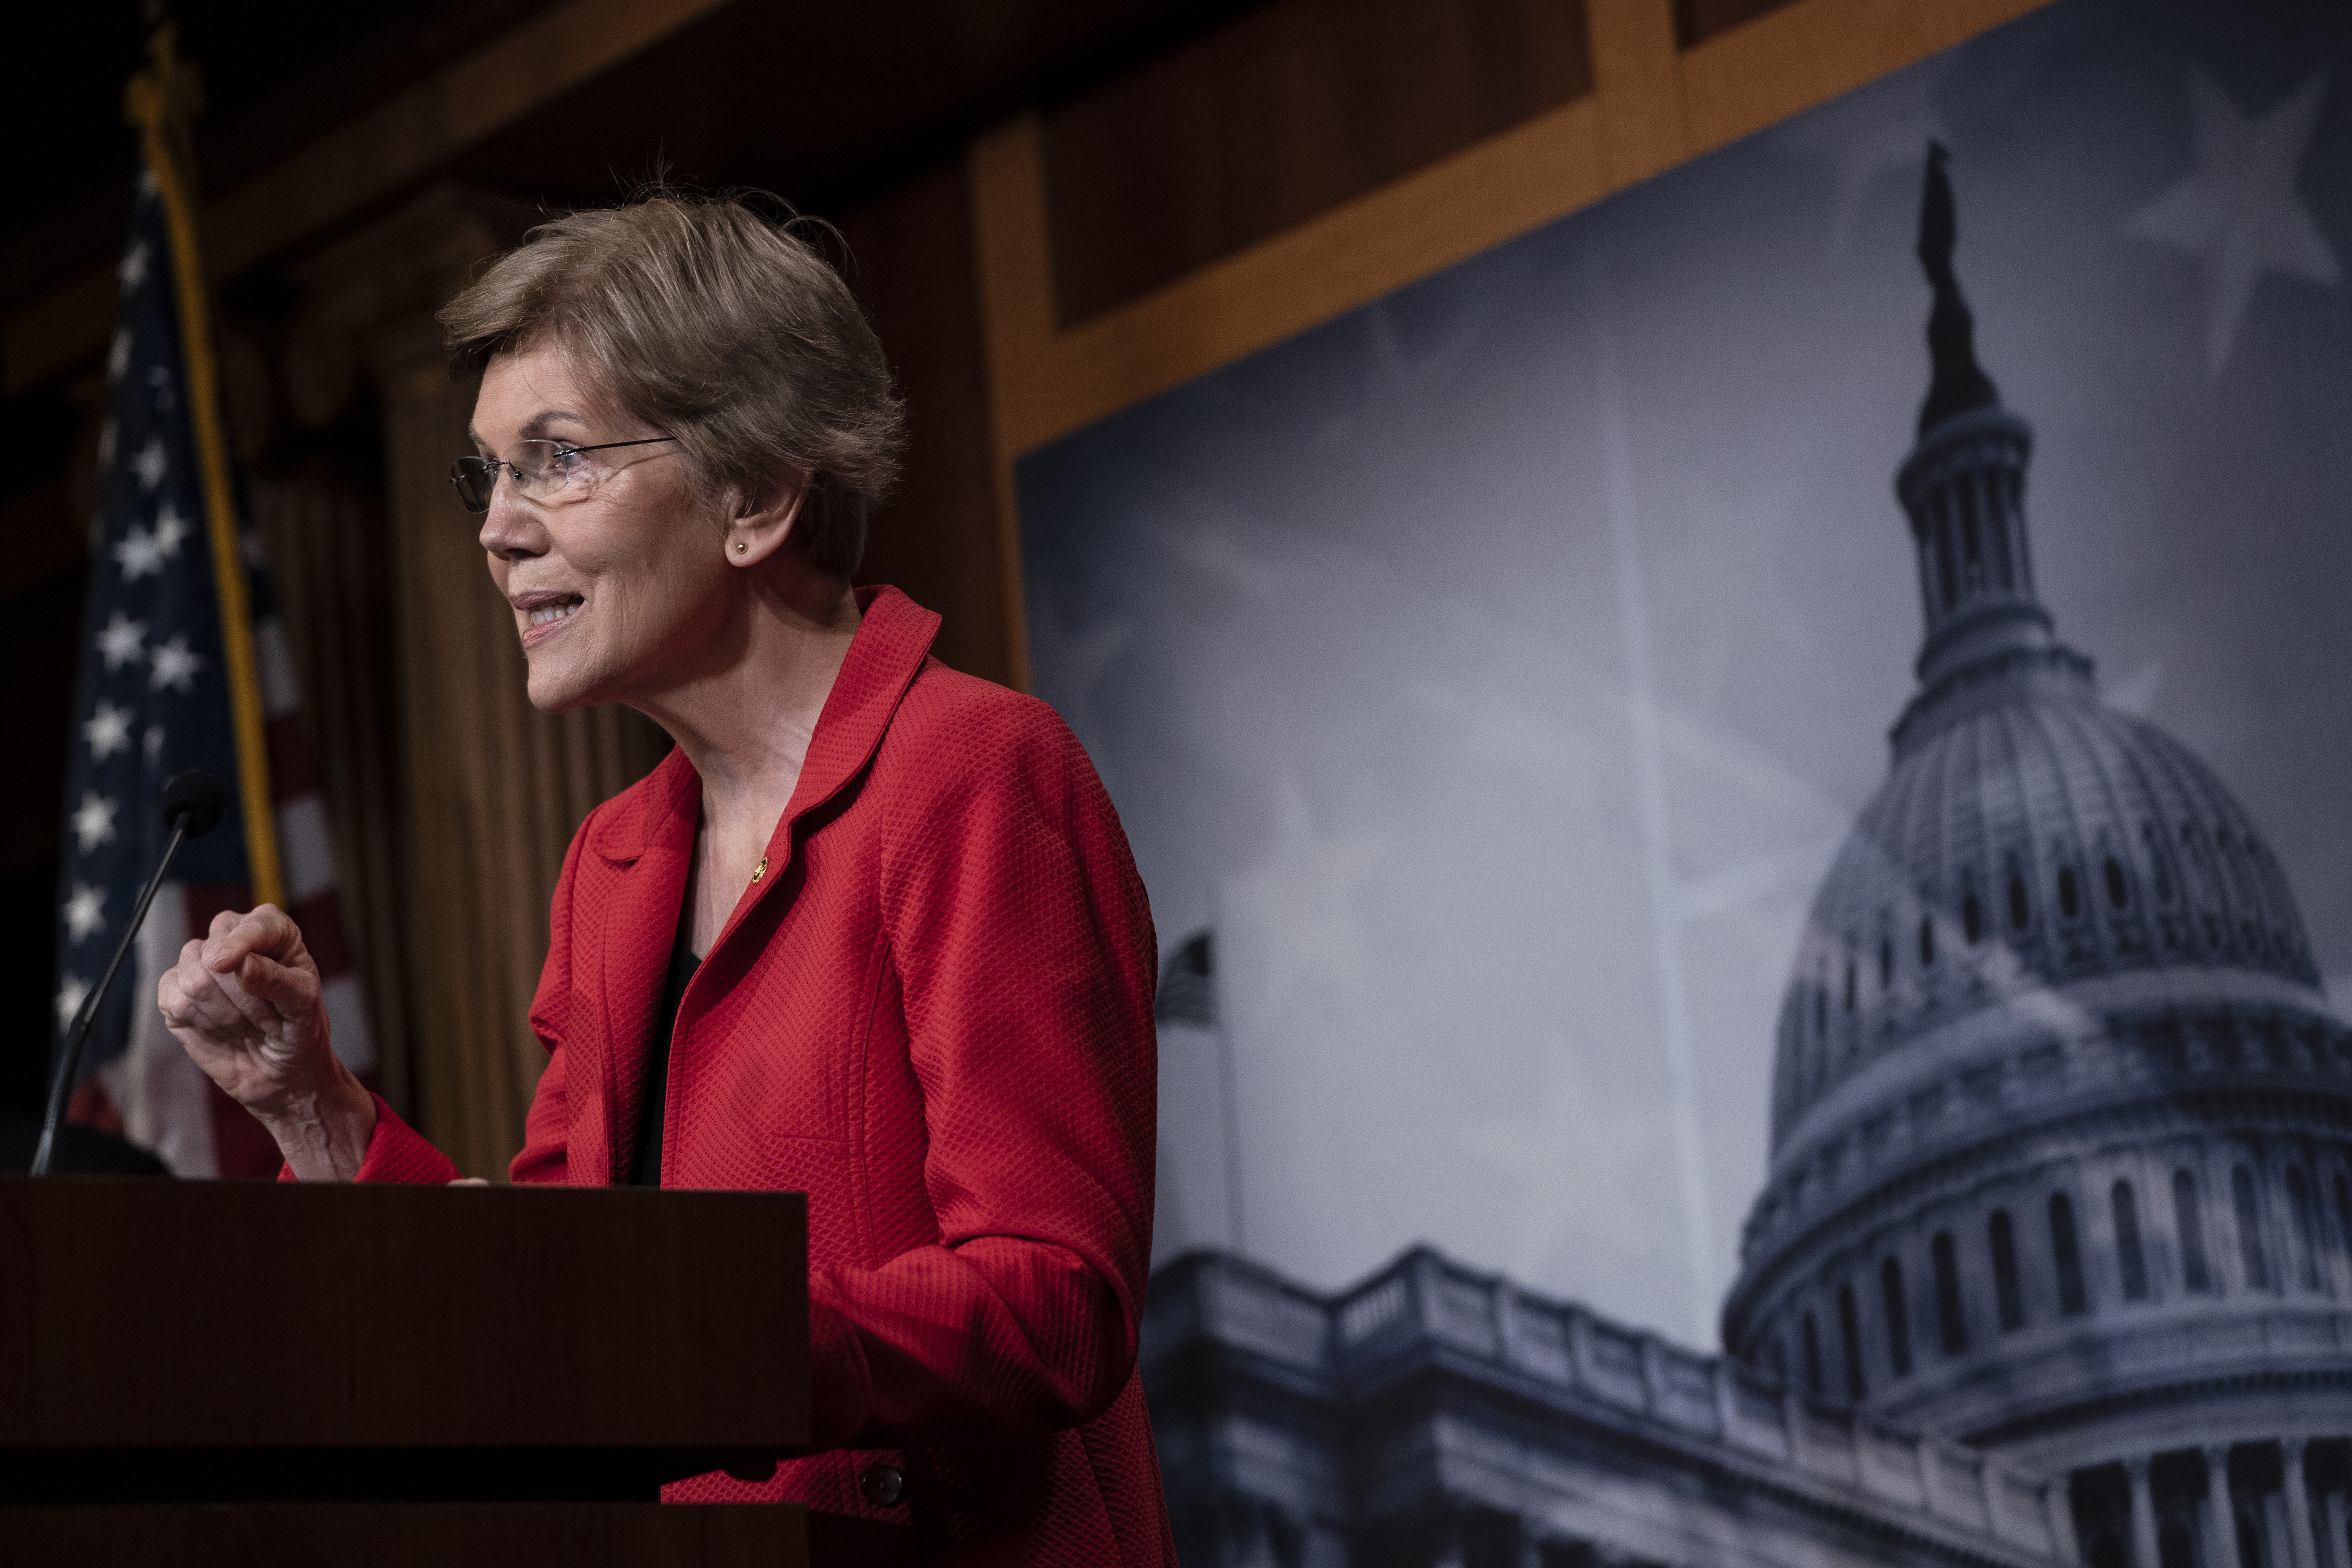 Sen. Elizabeth Warren (D-MA) speaks during a news conference concerning the extension of eviction protections in the next coronavirus bill, at the U.S. Capitol on July 22, 2020 in Washington, DC